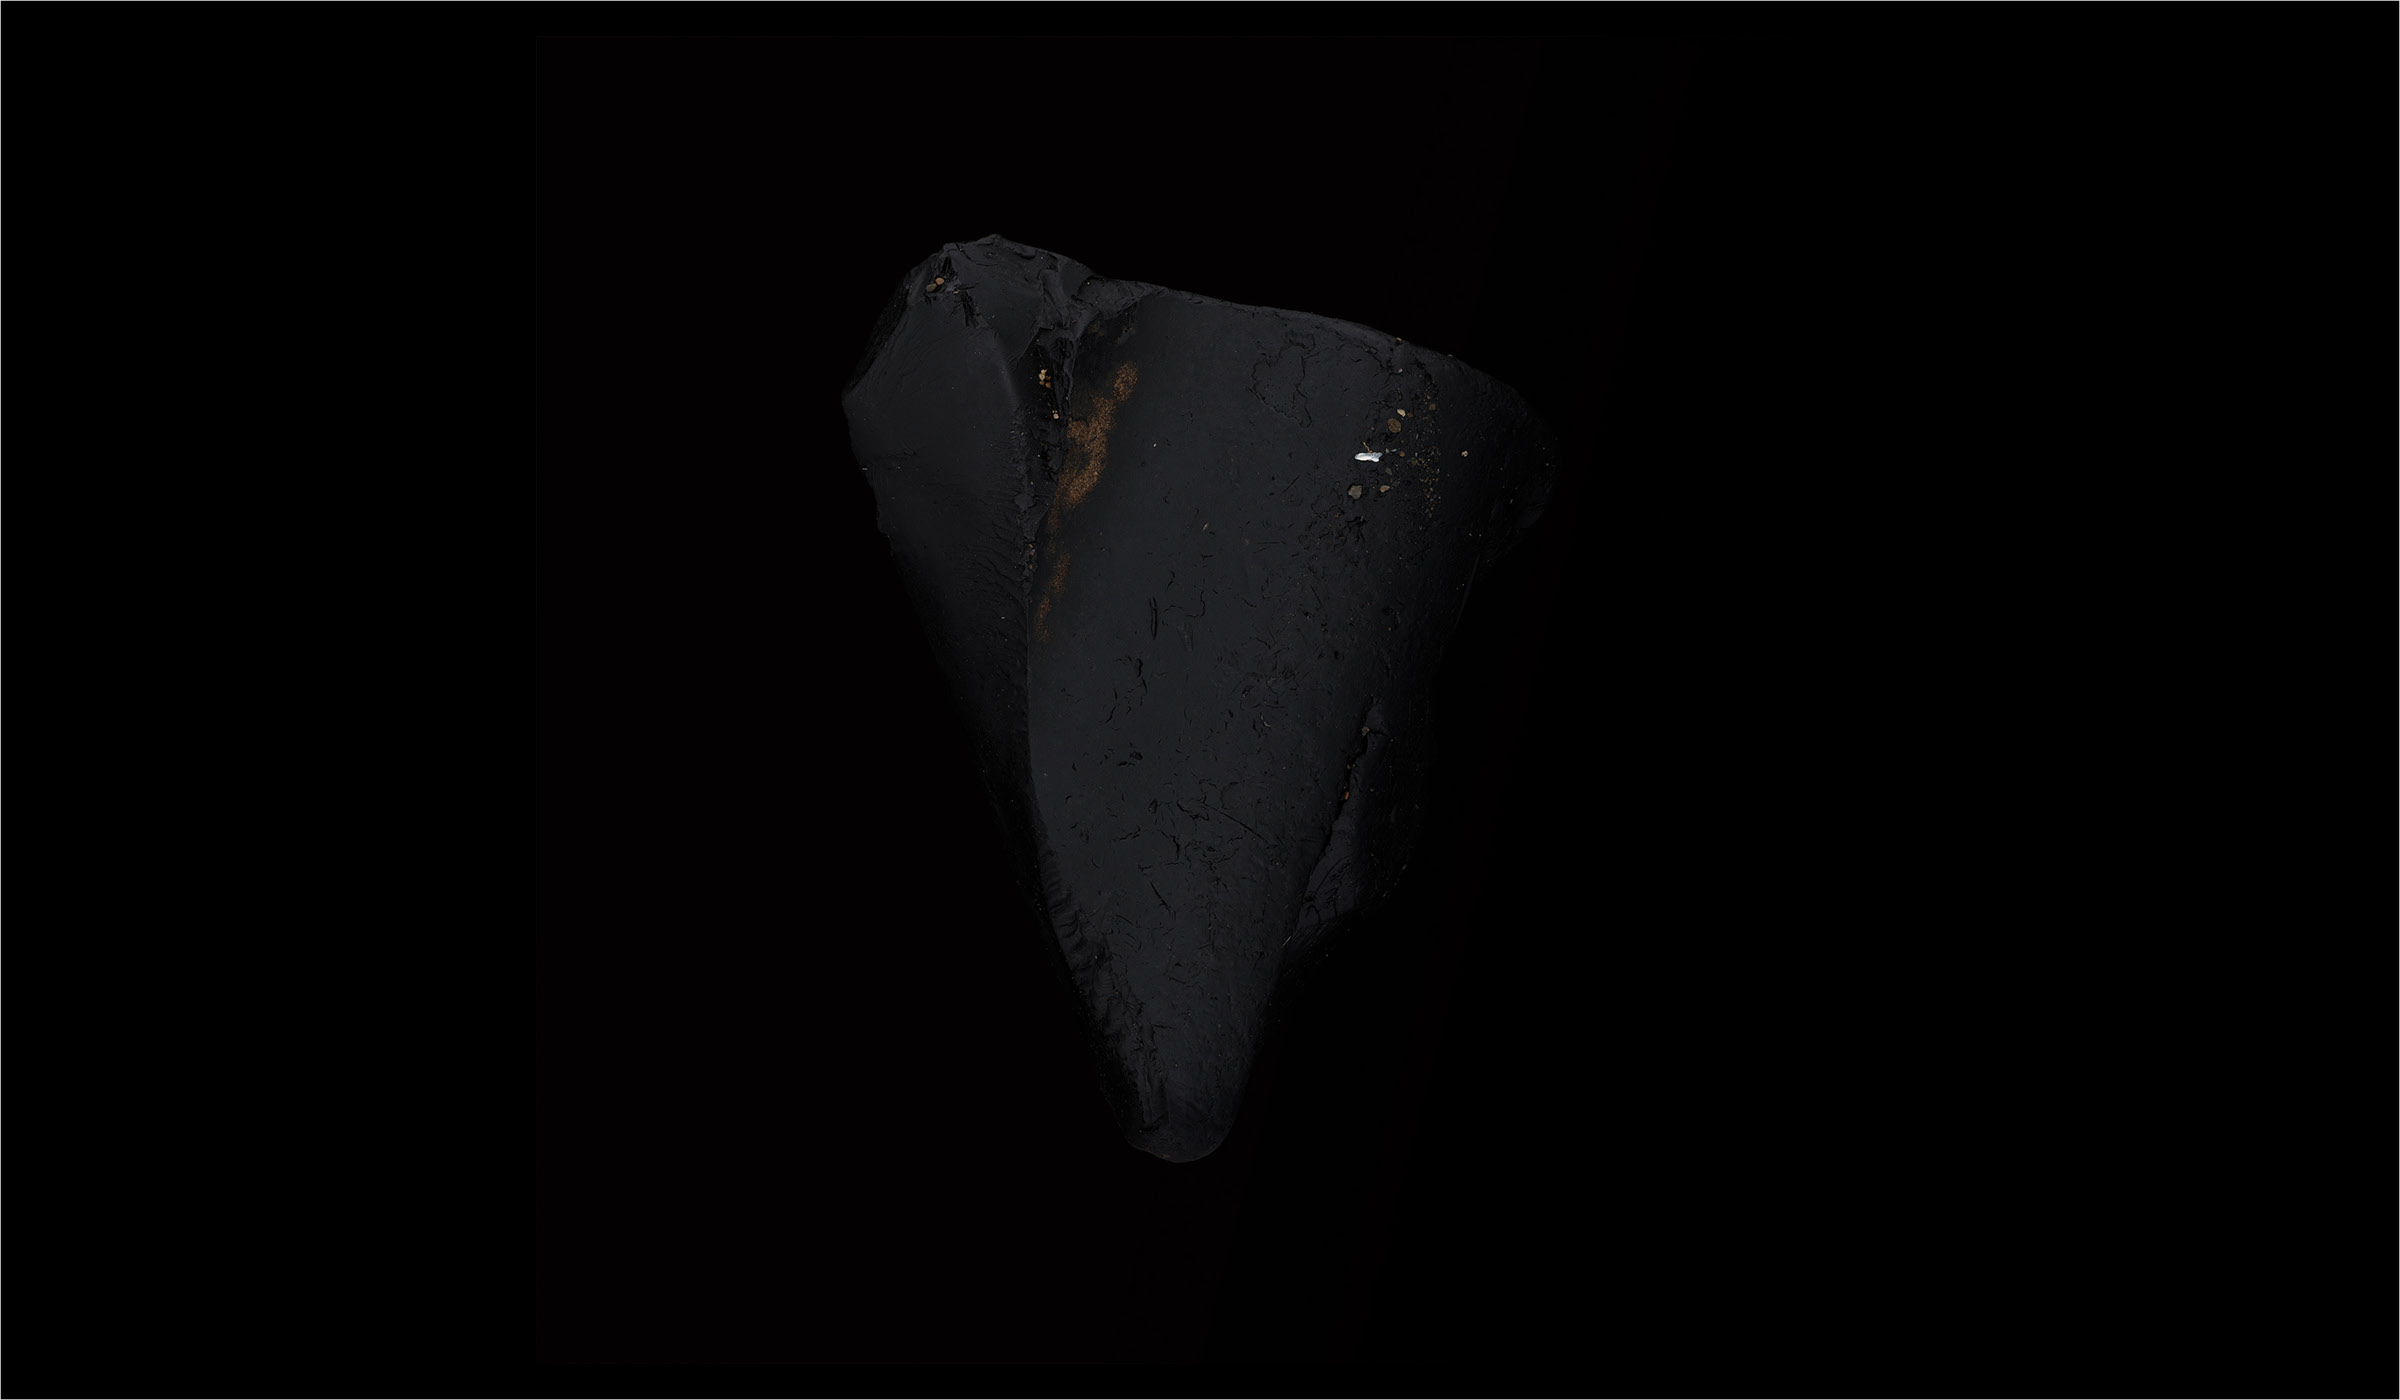 A black, cone shaped piece of earthen material floating against a black background